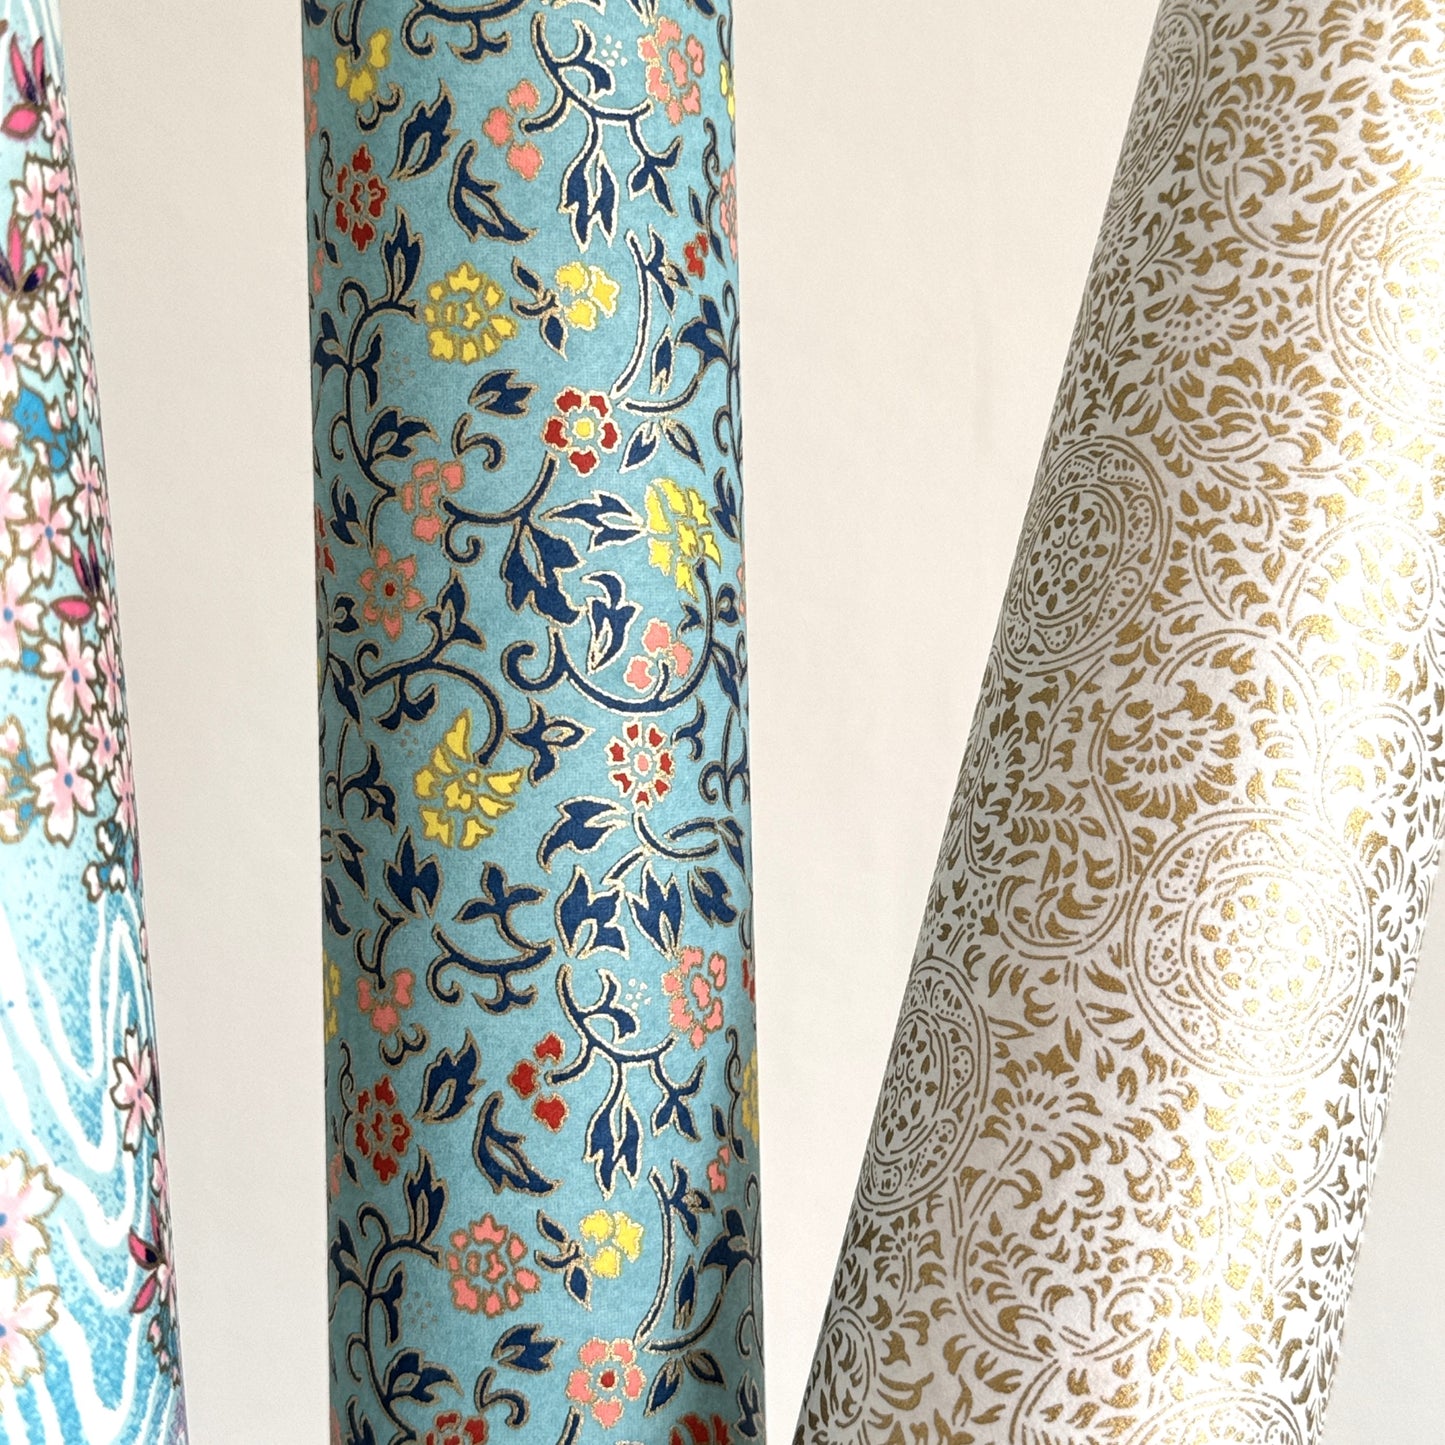 Japanese silkscreen chiyogami paper with a dainty floral pattern in navy, yellow and coral on a teal backdrop. Finished with gold metallic ink. Pictured rolled with other designs.